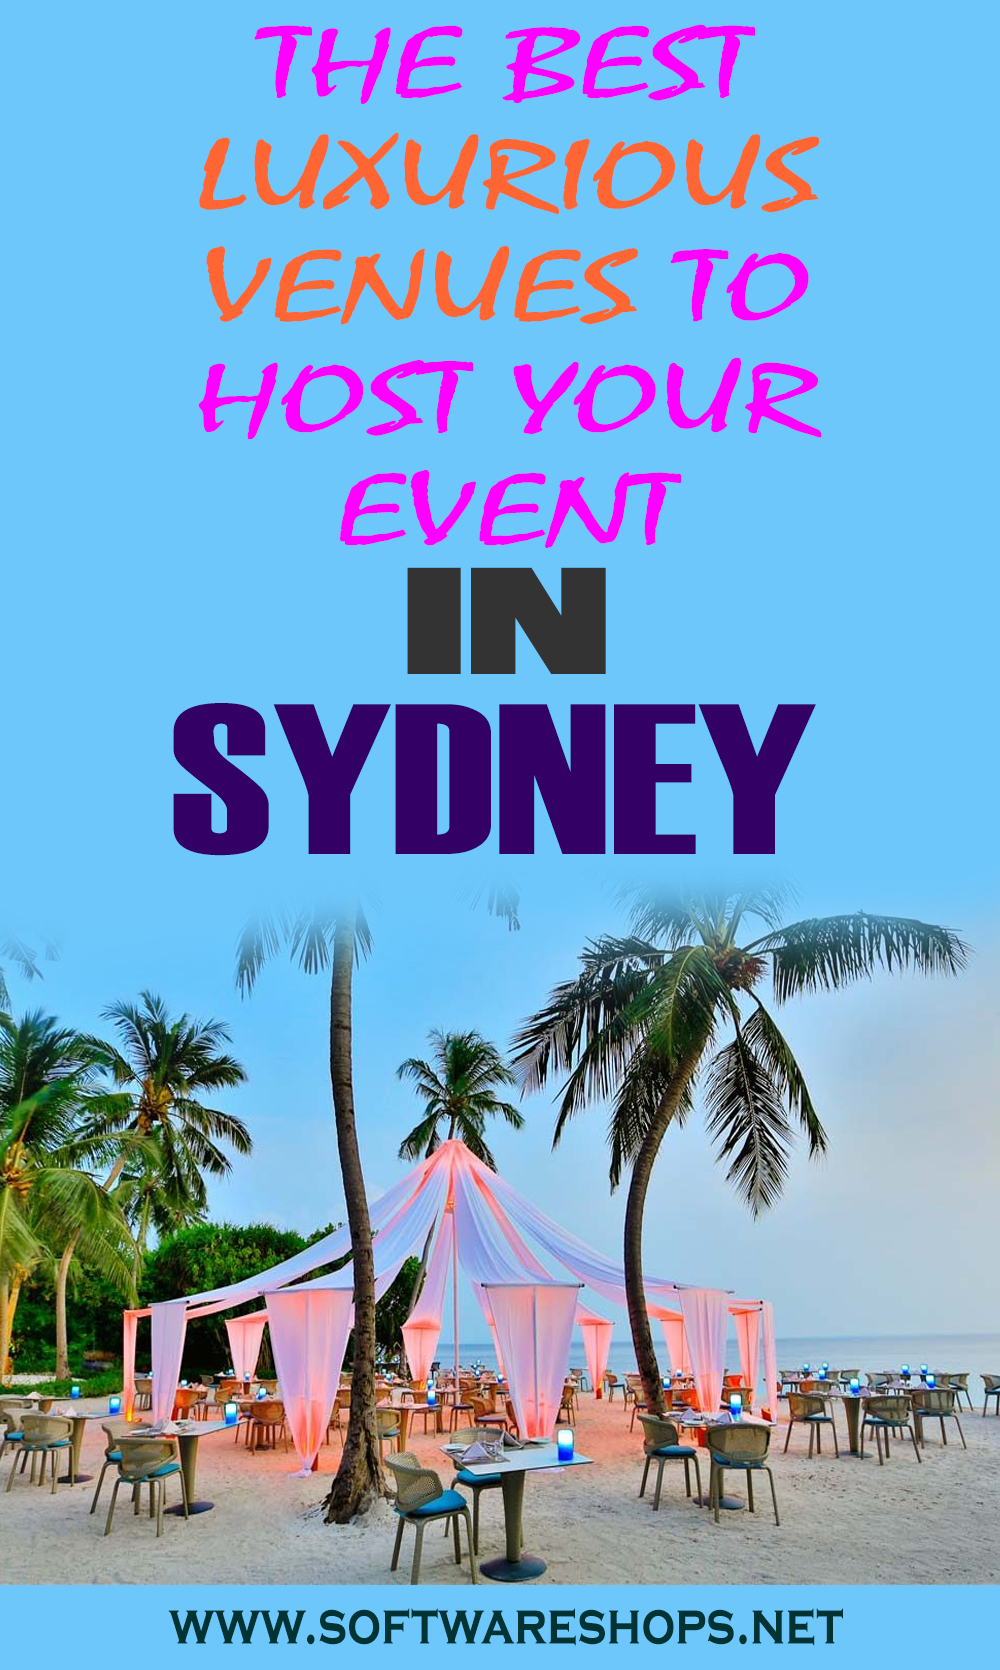 The Best Luxurious Venues to Host Your Event in Sydney